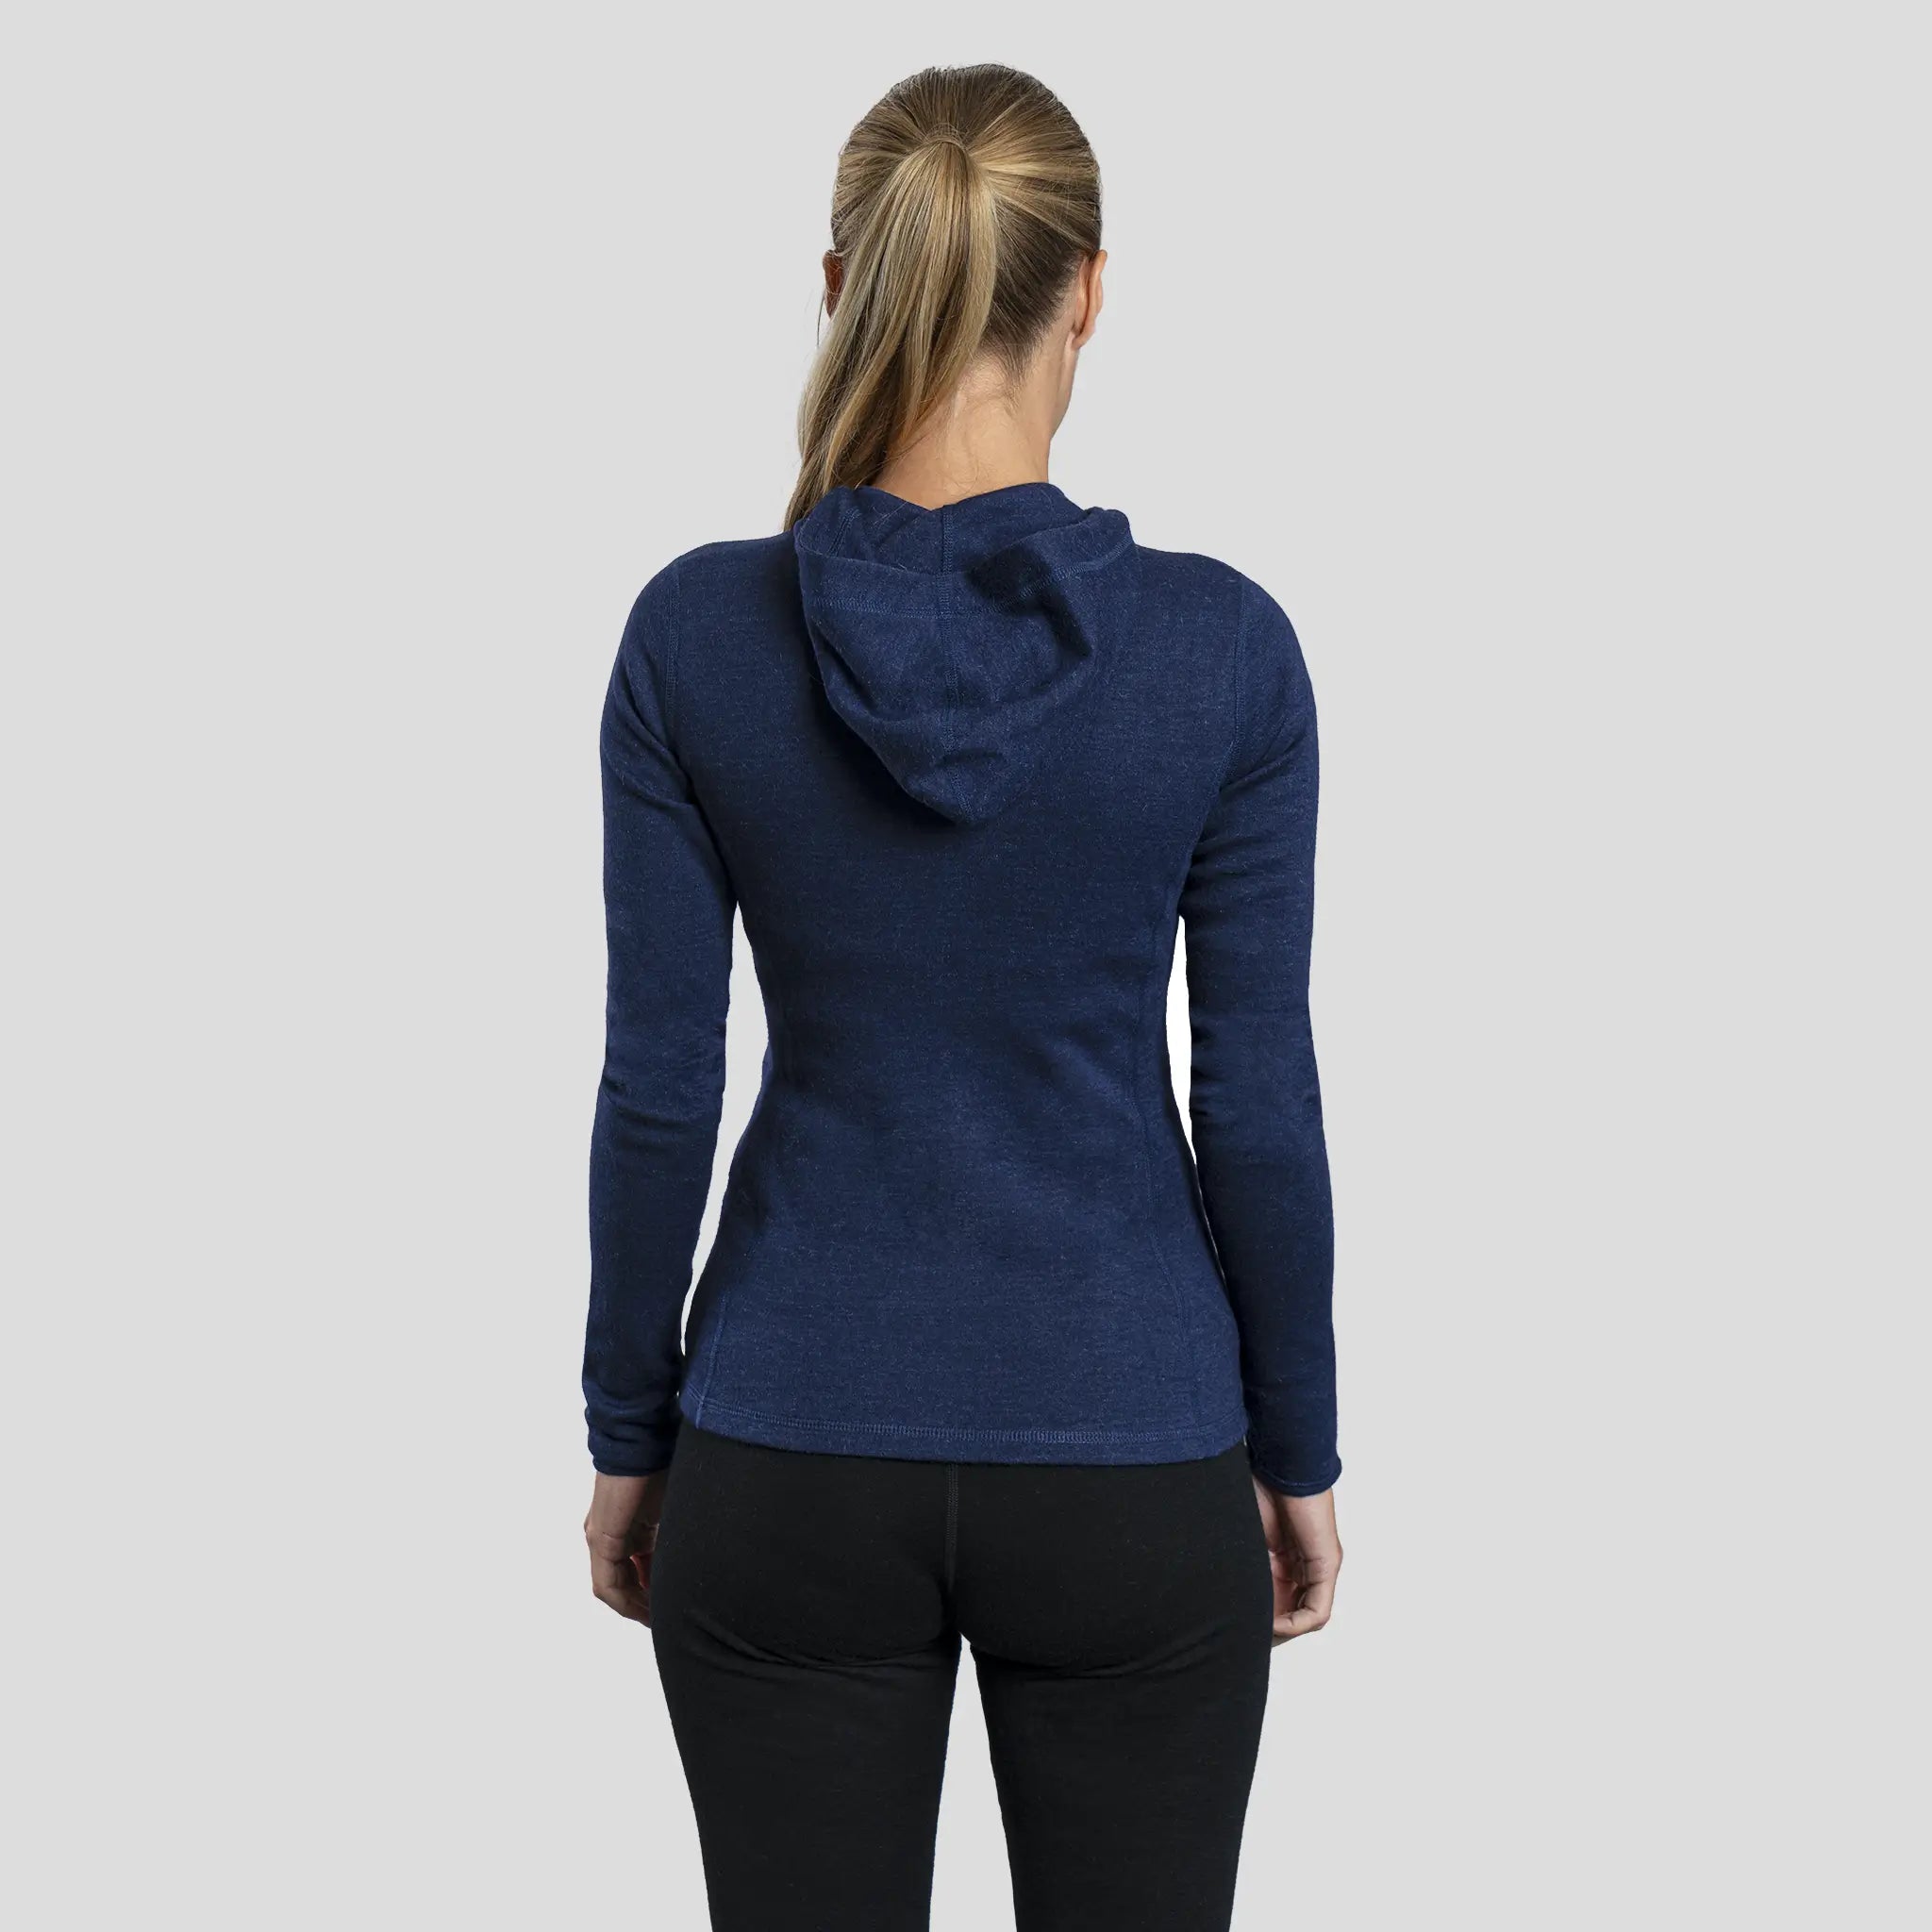 womens any activity hoodie jacket full zip color navy blue